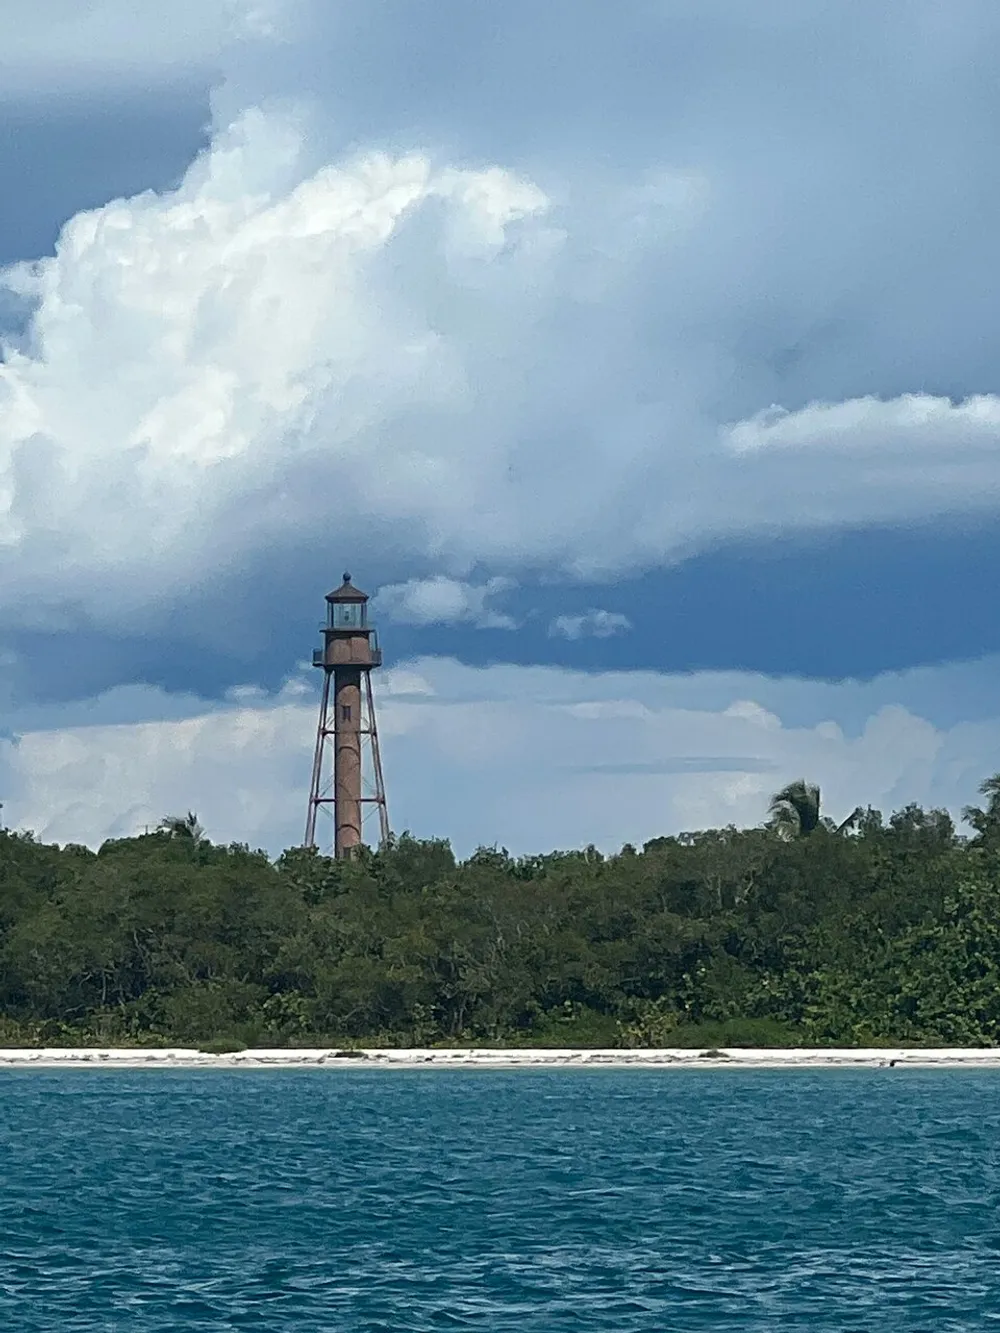 The image shows a tall slender lighthouse on a lush coastline against a backdrop of dynamic blue skies and puffy white clouds as viewed from the water